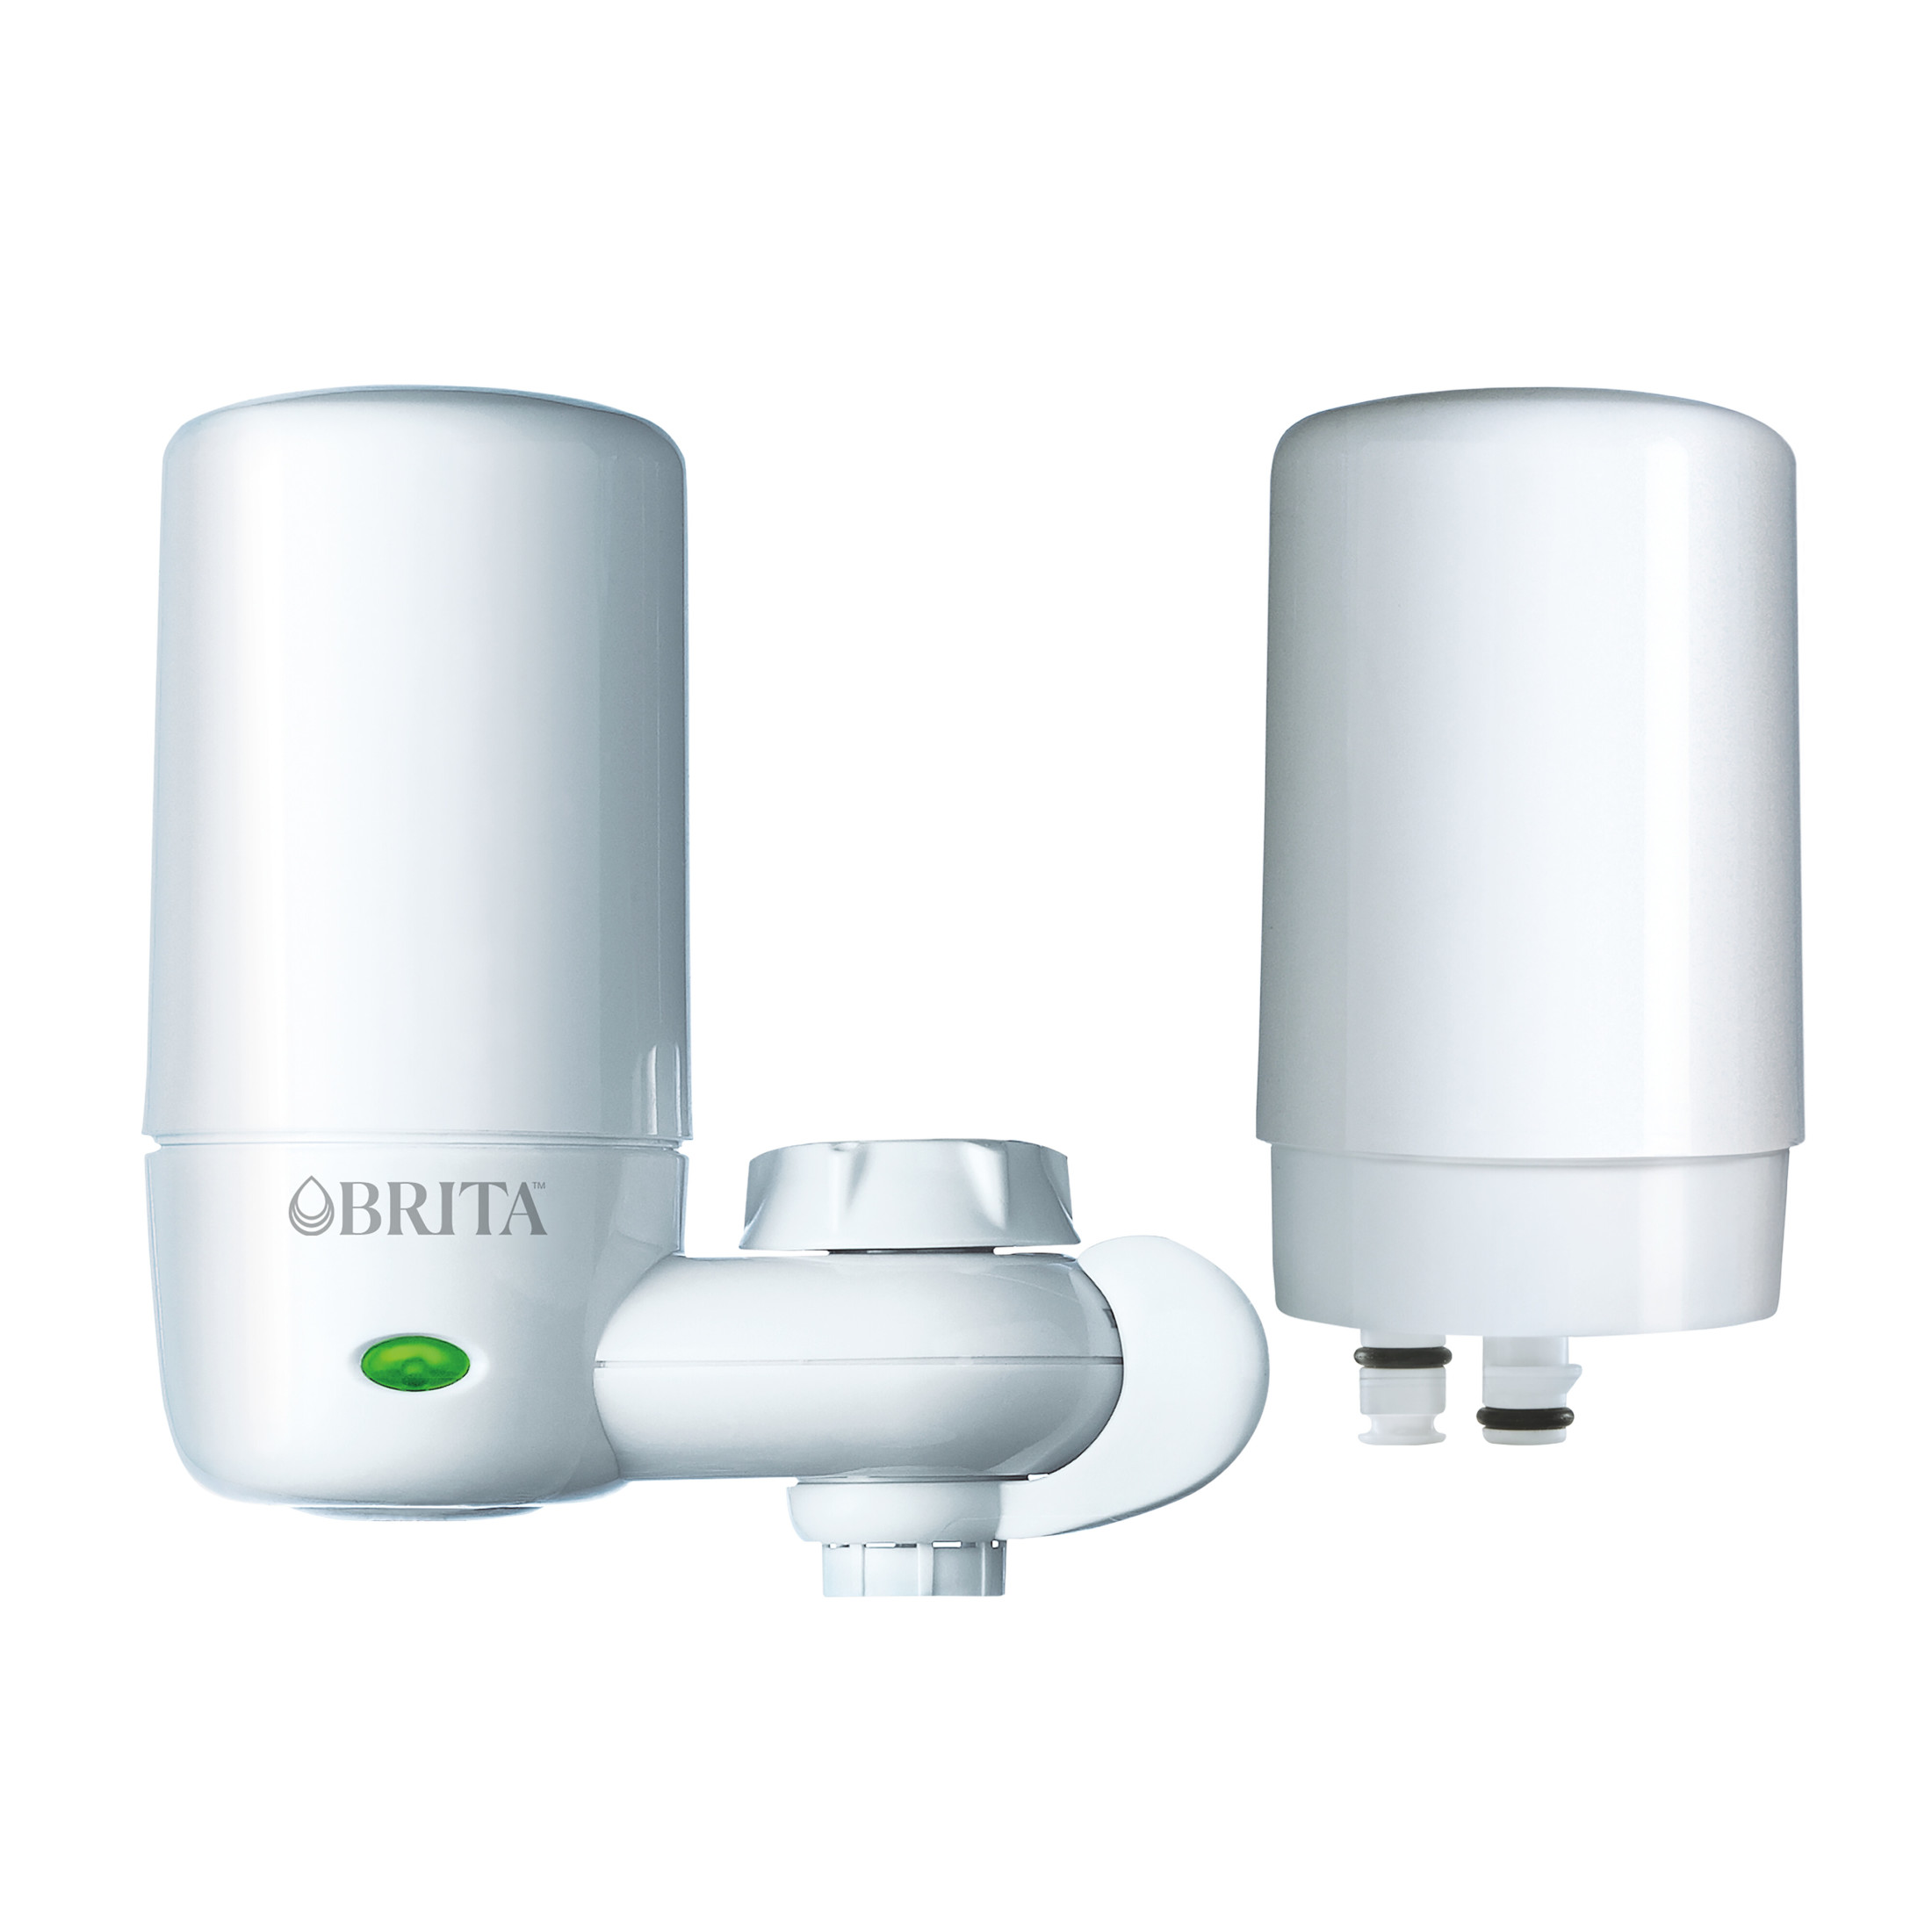 Brita Elite Water Faucet Filtration Mount System, Fits Standard Faucets, White, Includes 2 Filters - image 1 of 8